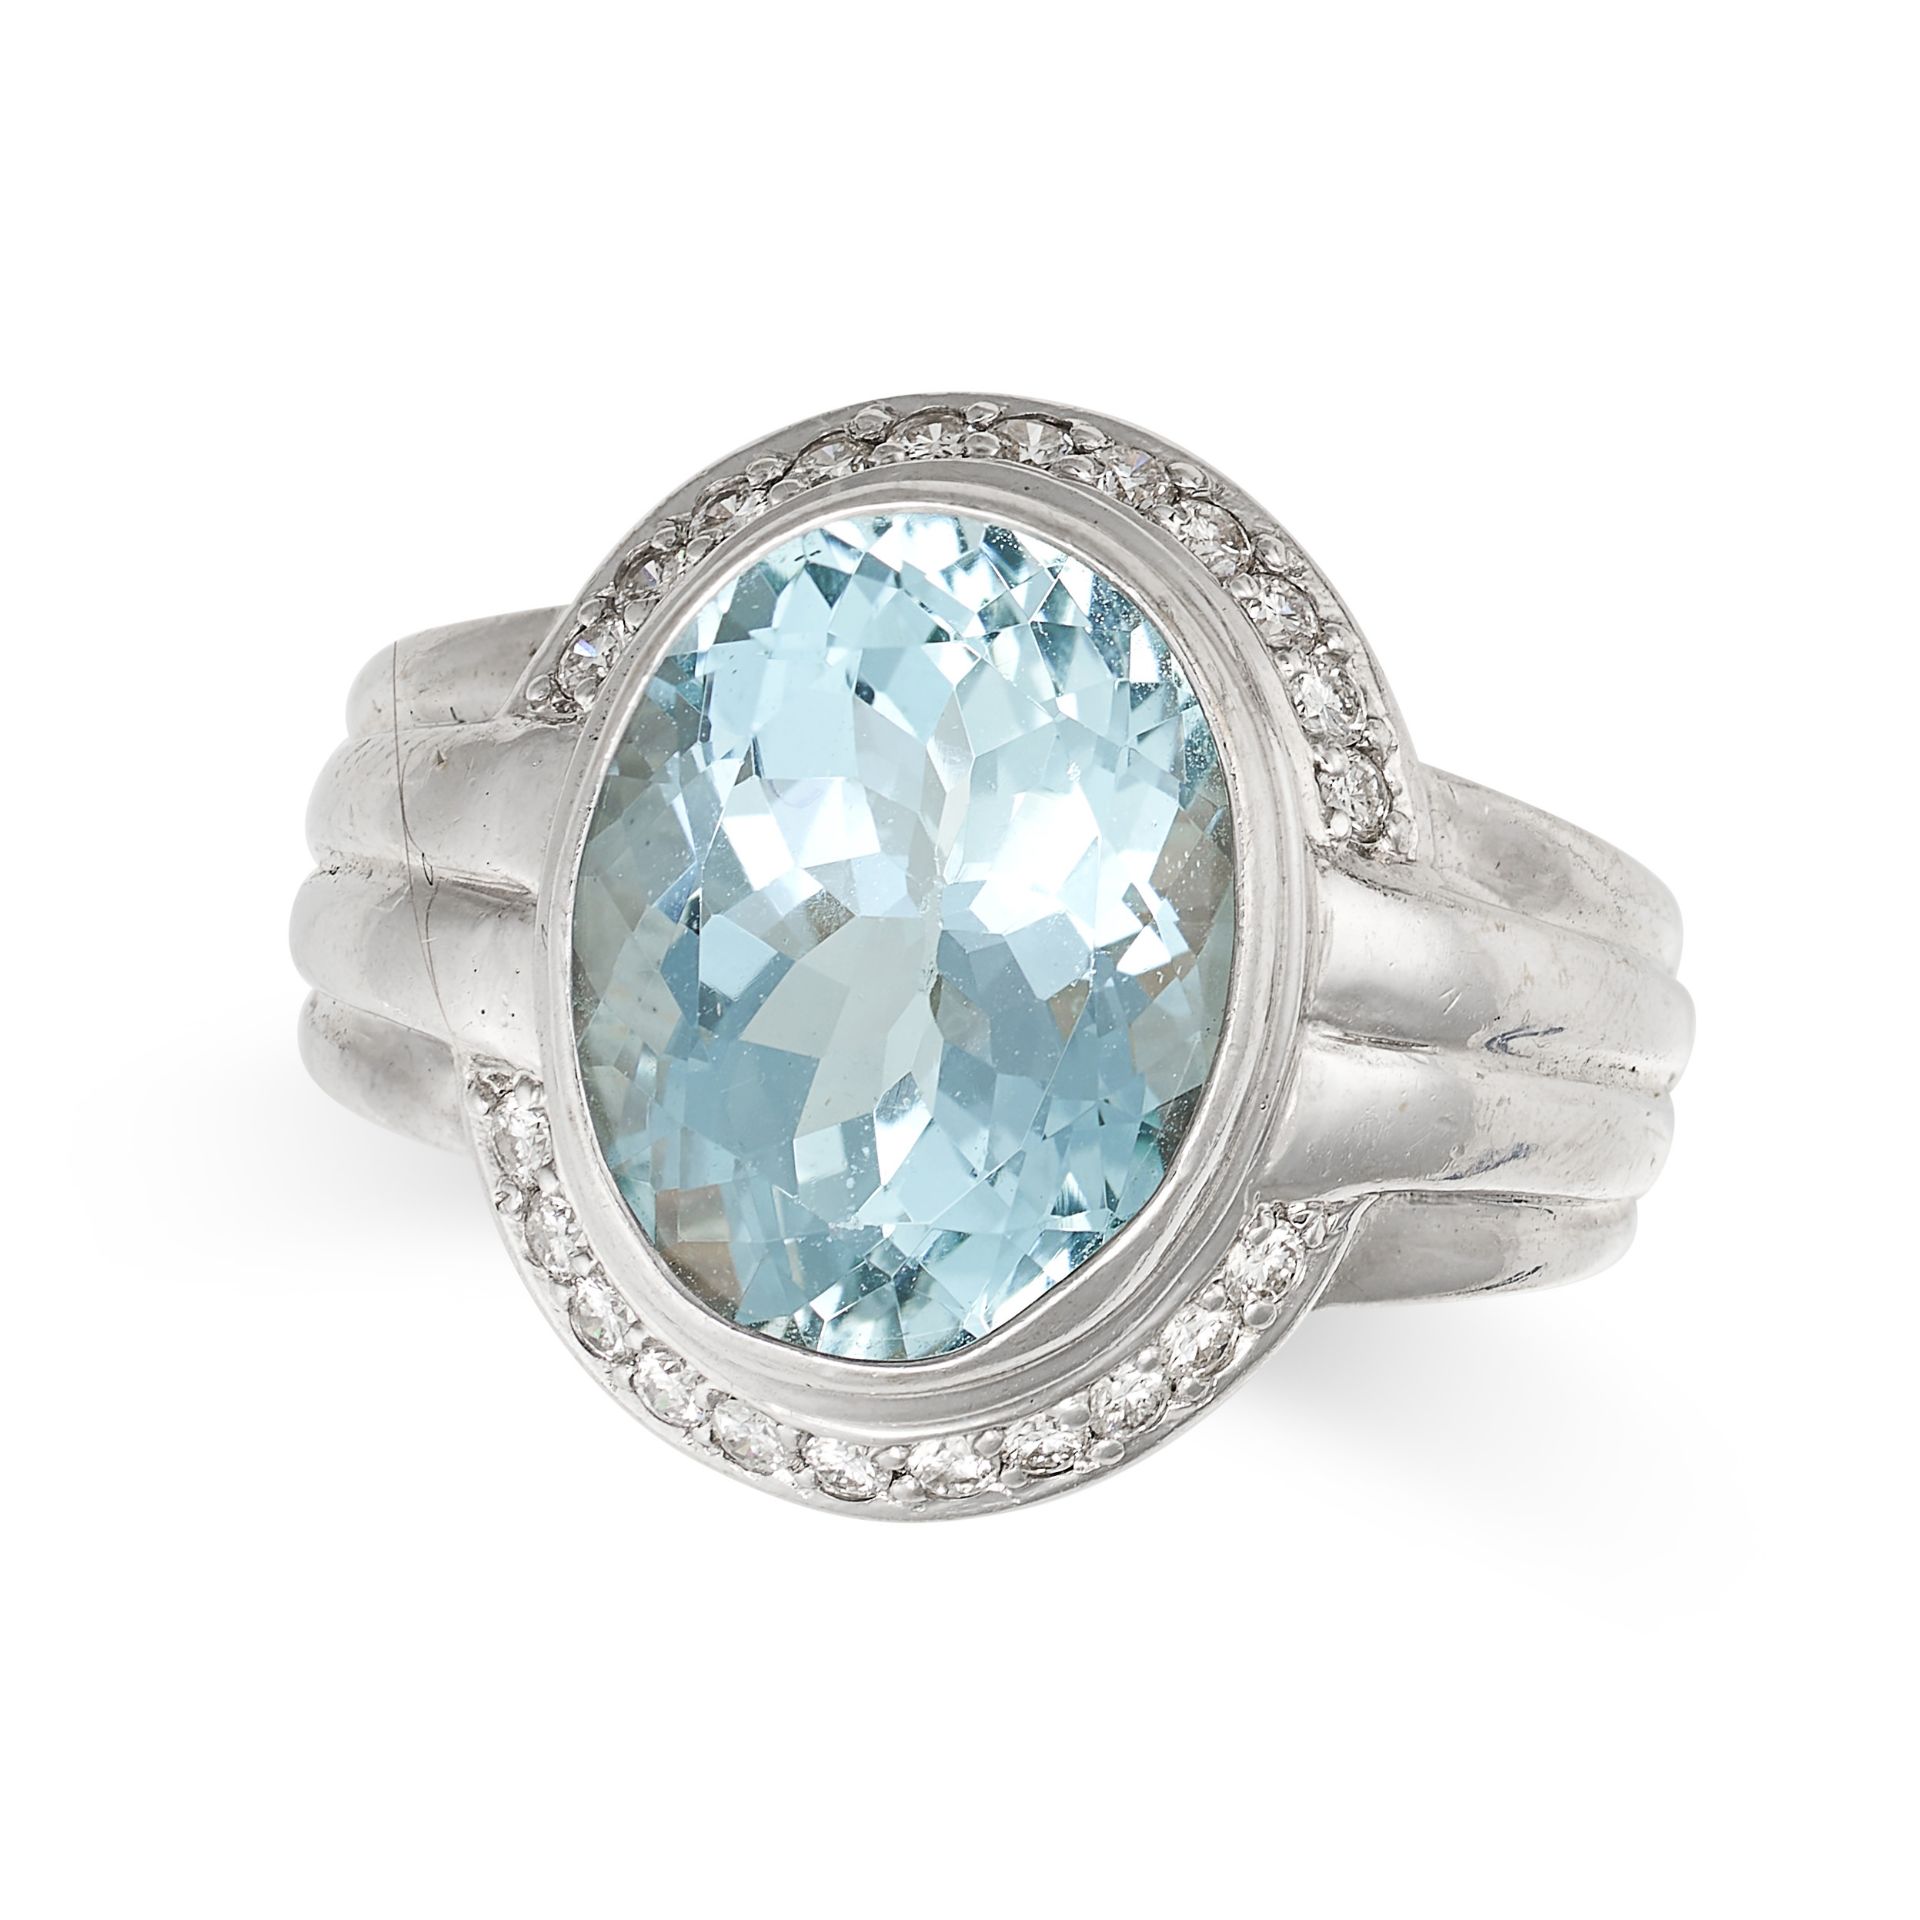 AN AQUAMARINE AND DIAMOND RING in 18ct white gold, set with an oval cut aquamarine of approximate...